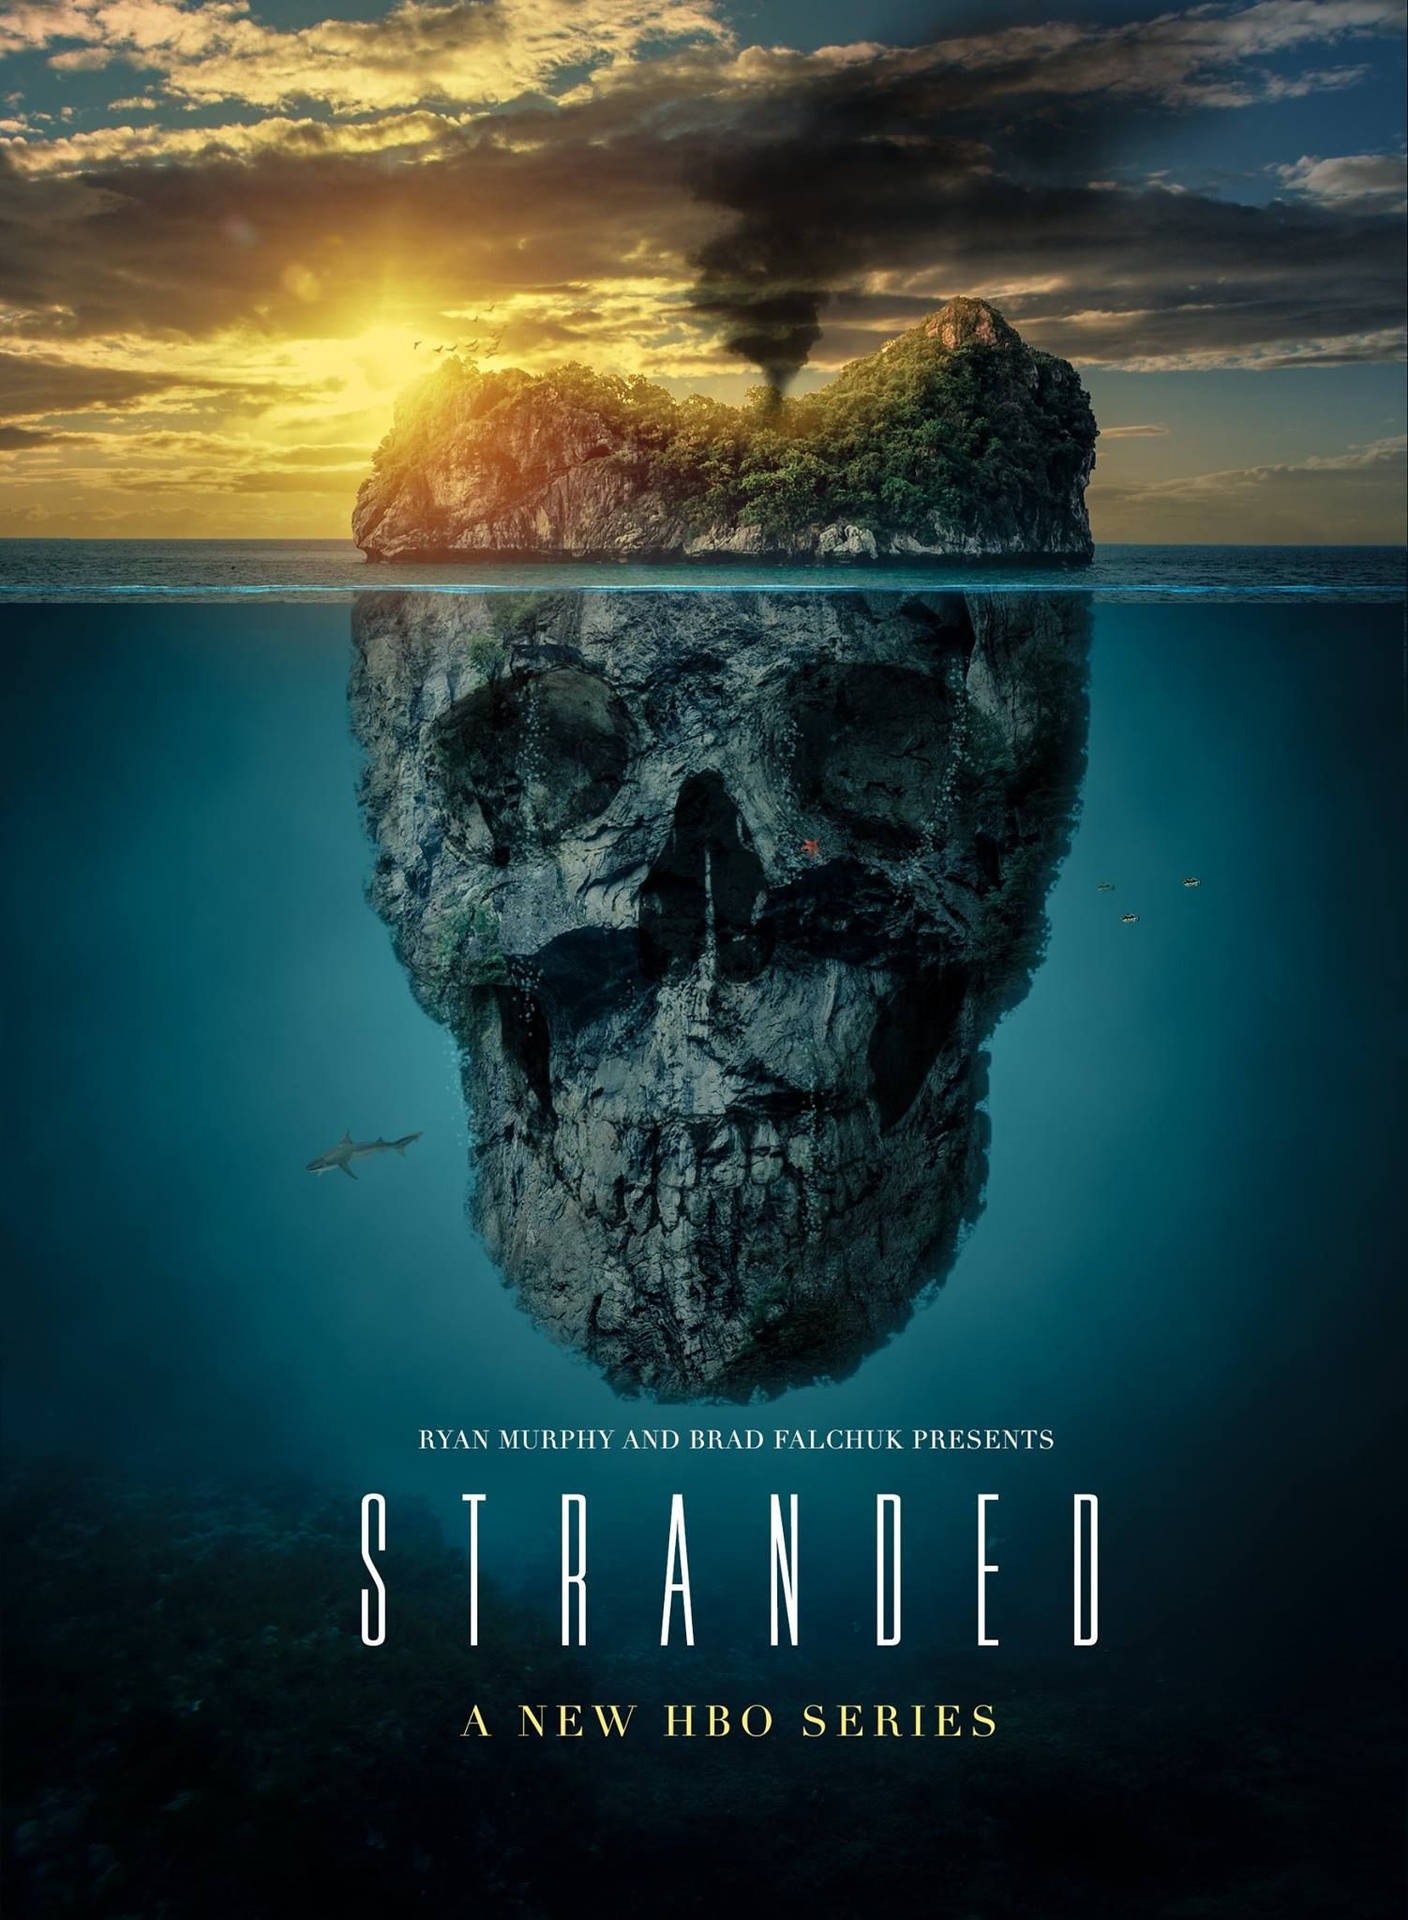 HBO Series Stranded Background